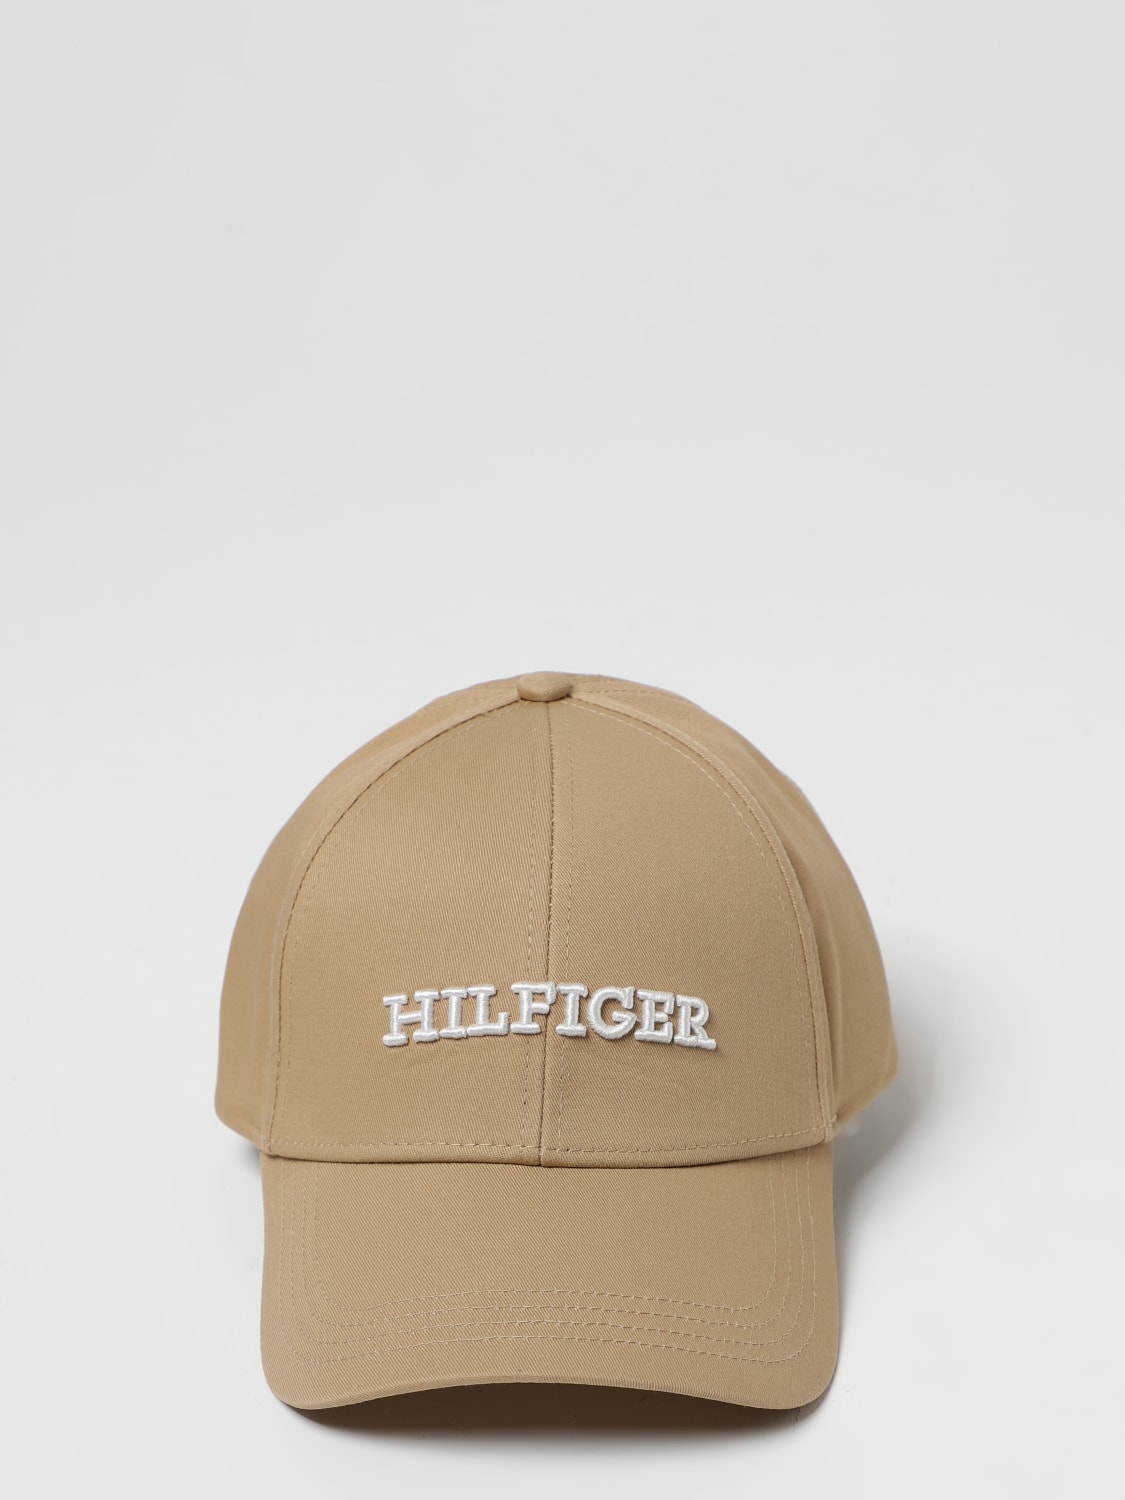 TOMMY in hat Beige hat AW0AW15532 cotton HILFIGER: Hilfiger Tommy logo at - with embroidered | online